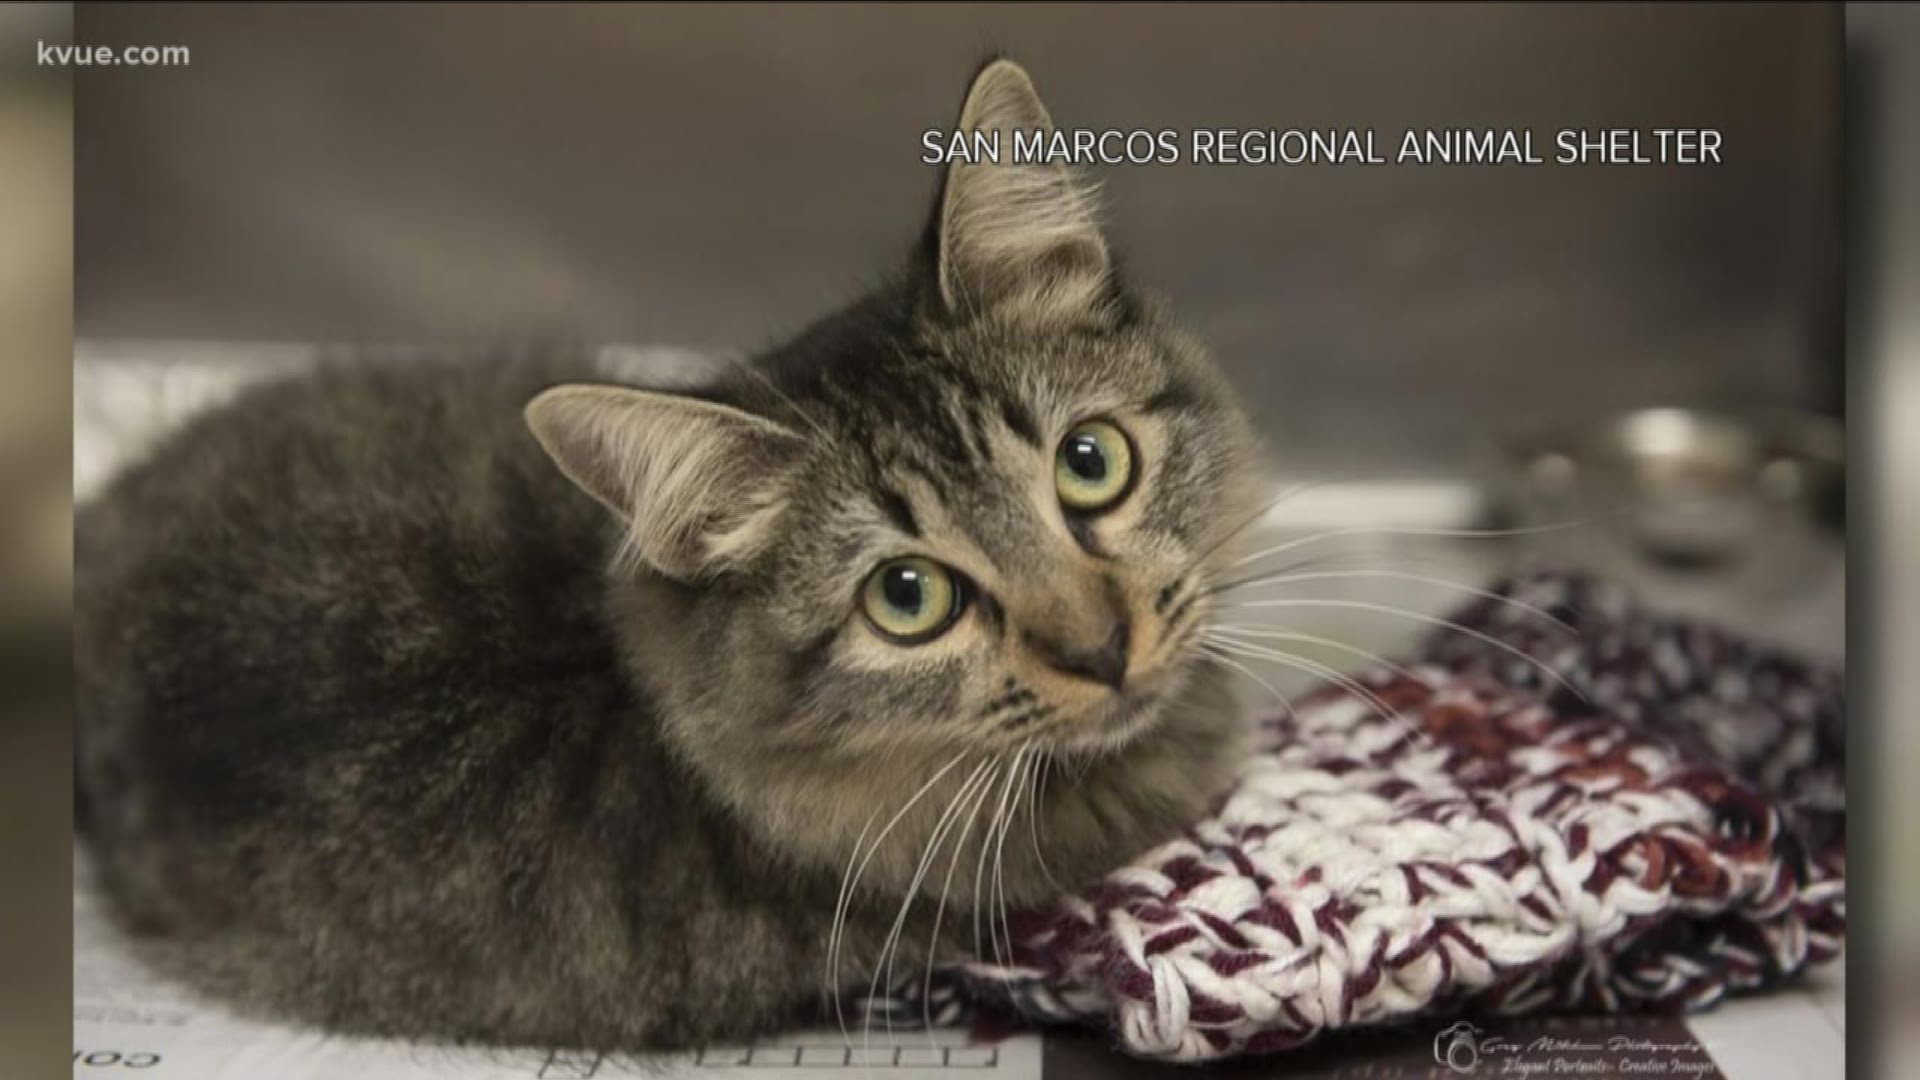 More than 30 cats rescued from bad conditions are ready for adoption.